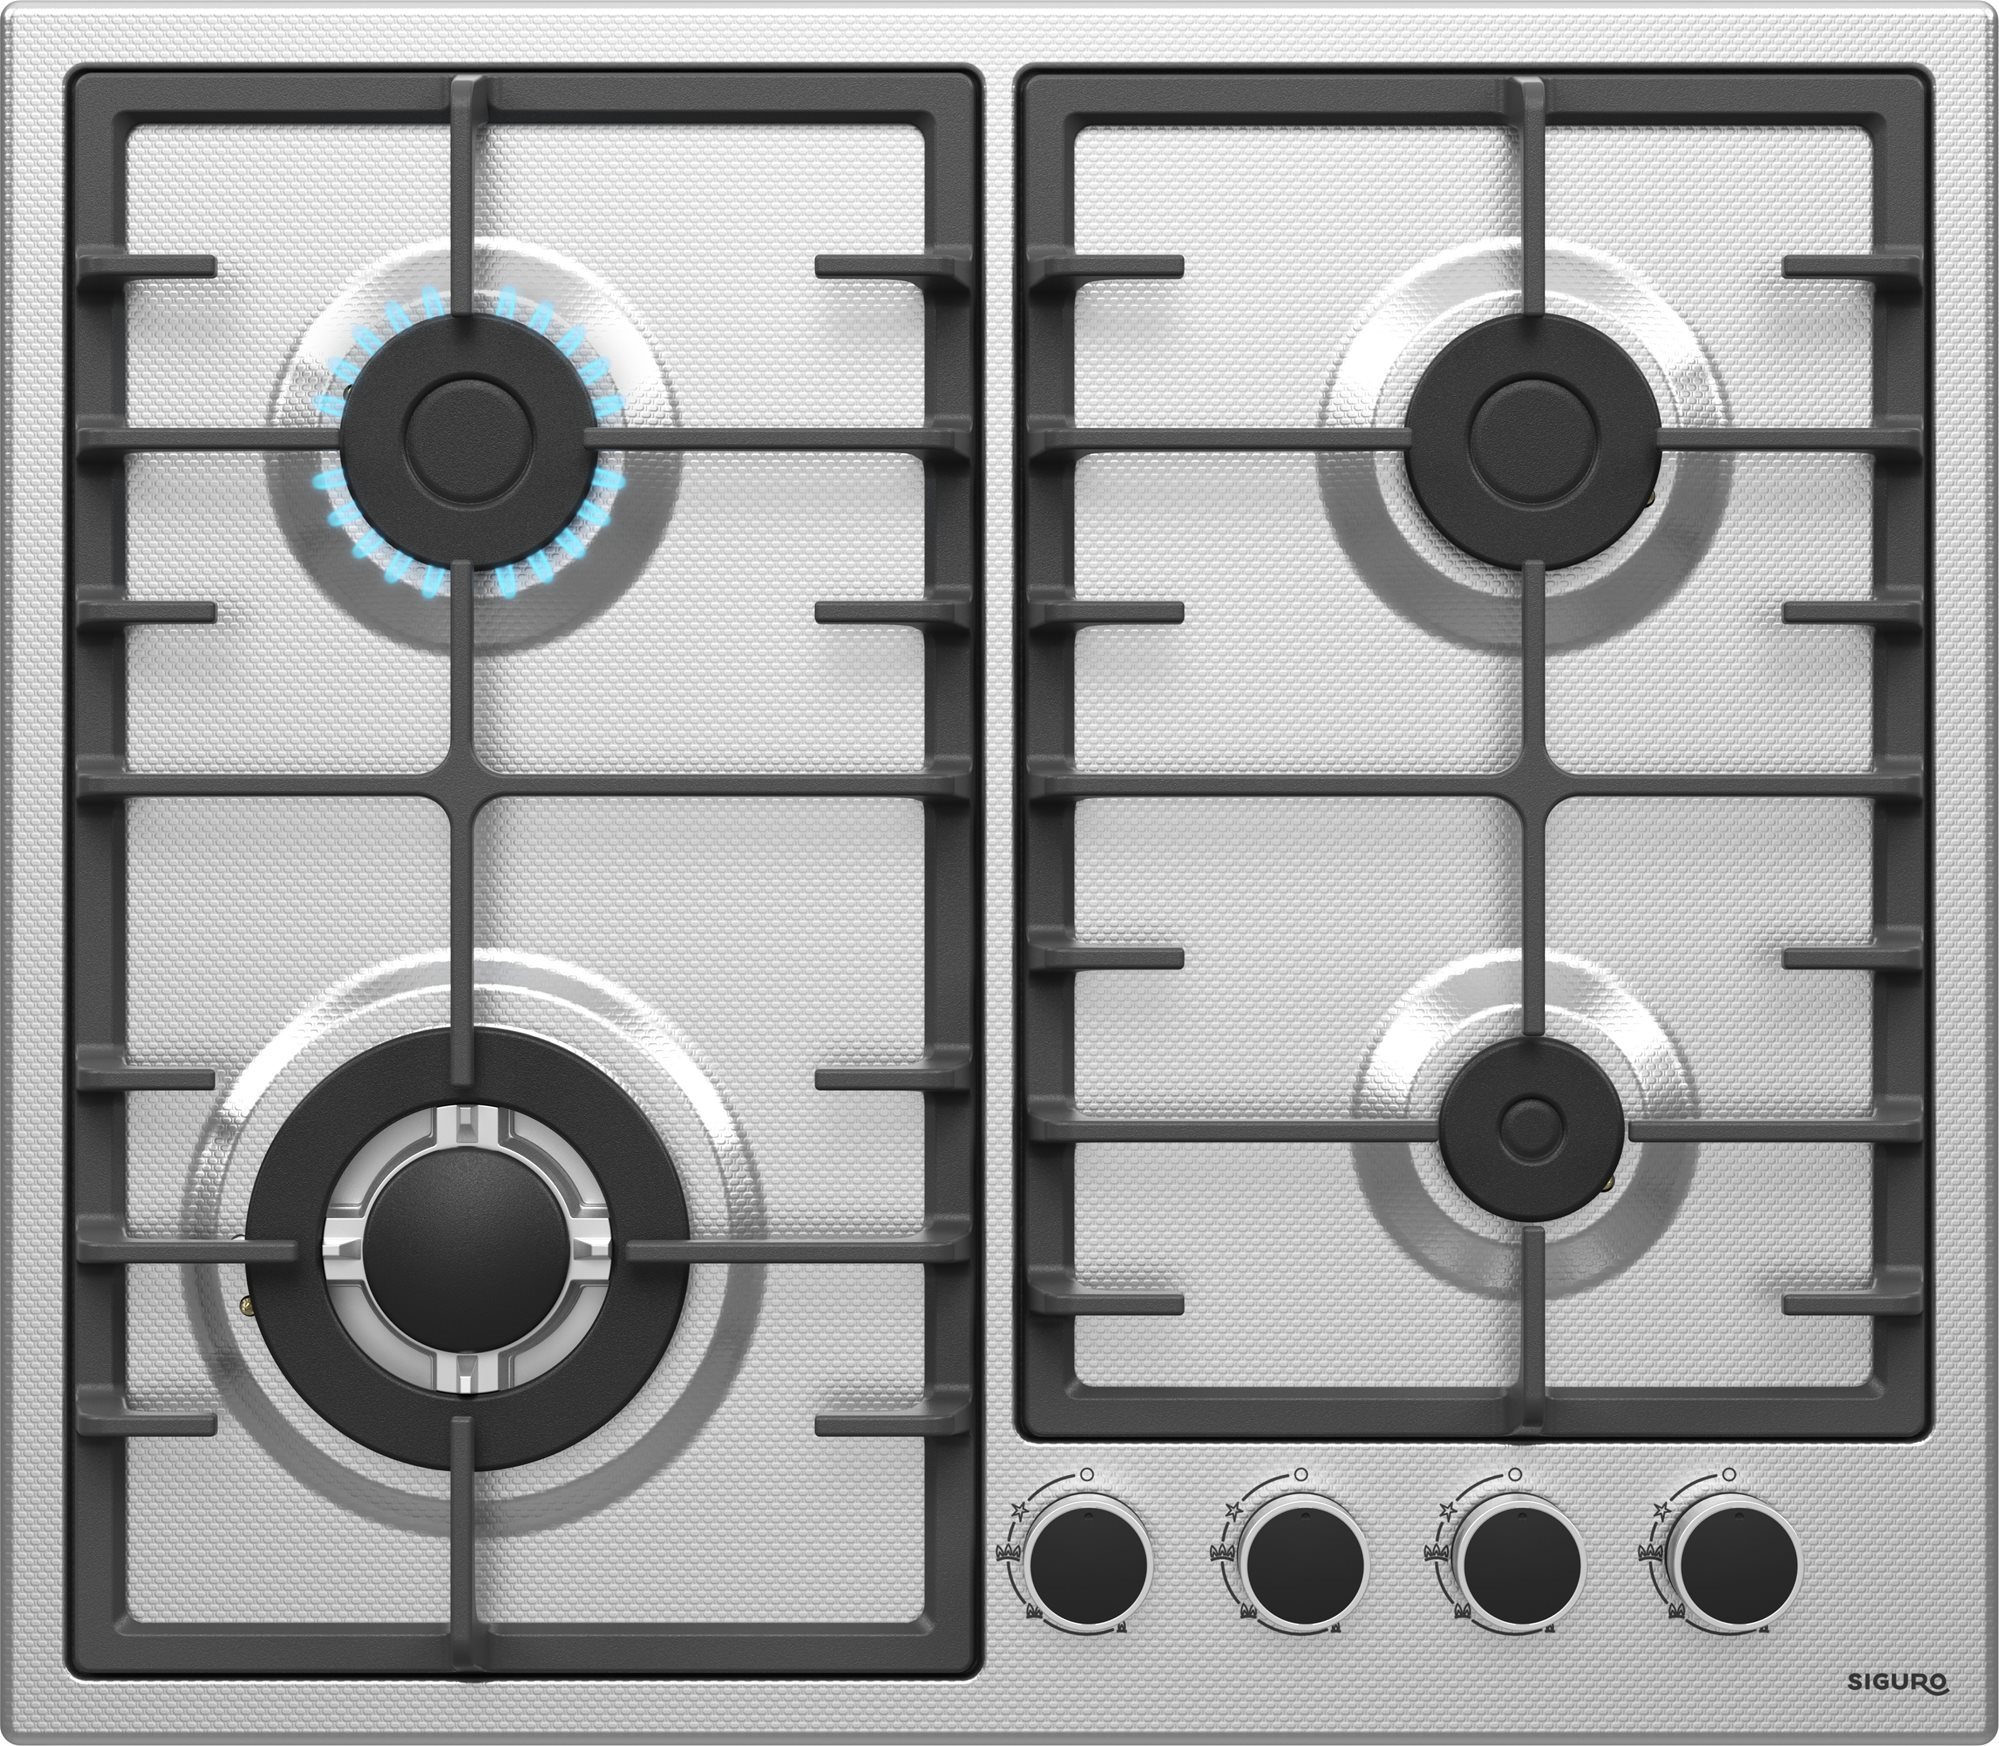 Siguro HB-G25 Gas Cooktop